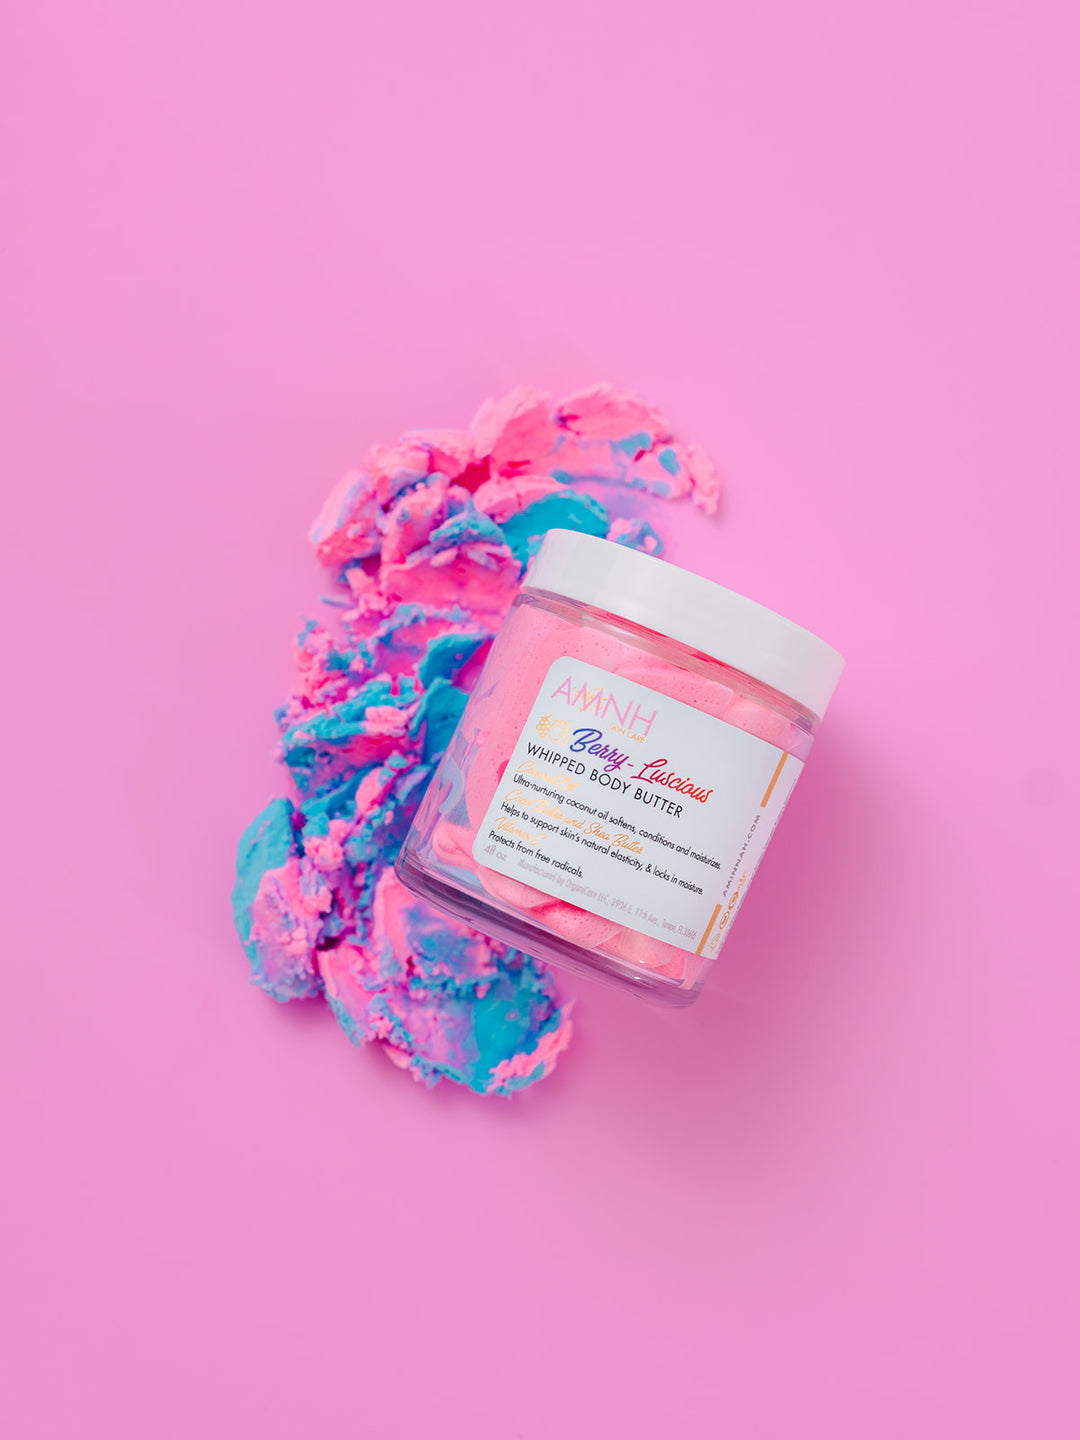 "Berry-licious" Whipped Body Butter